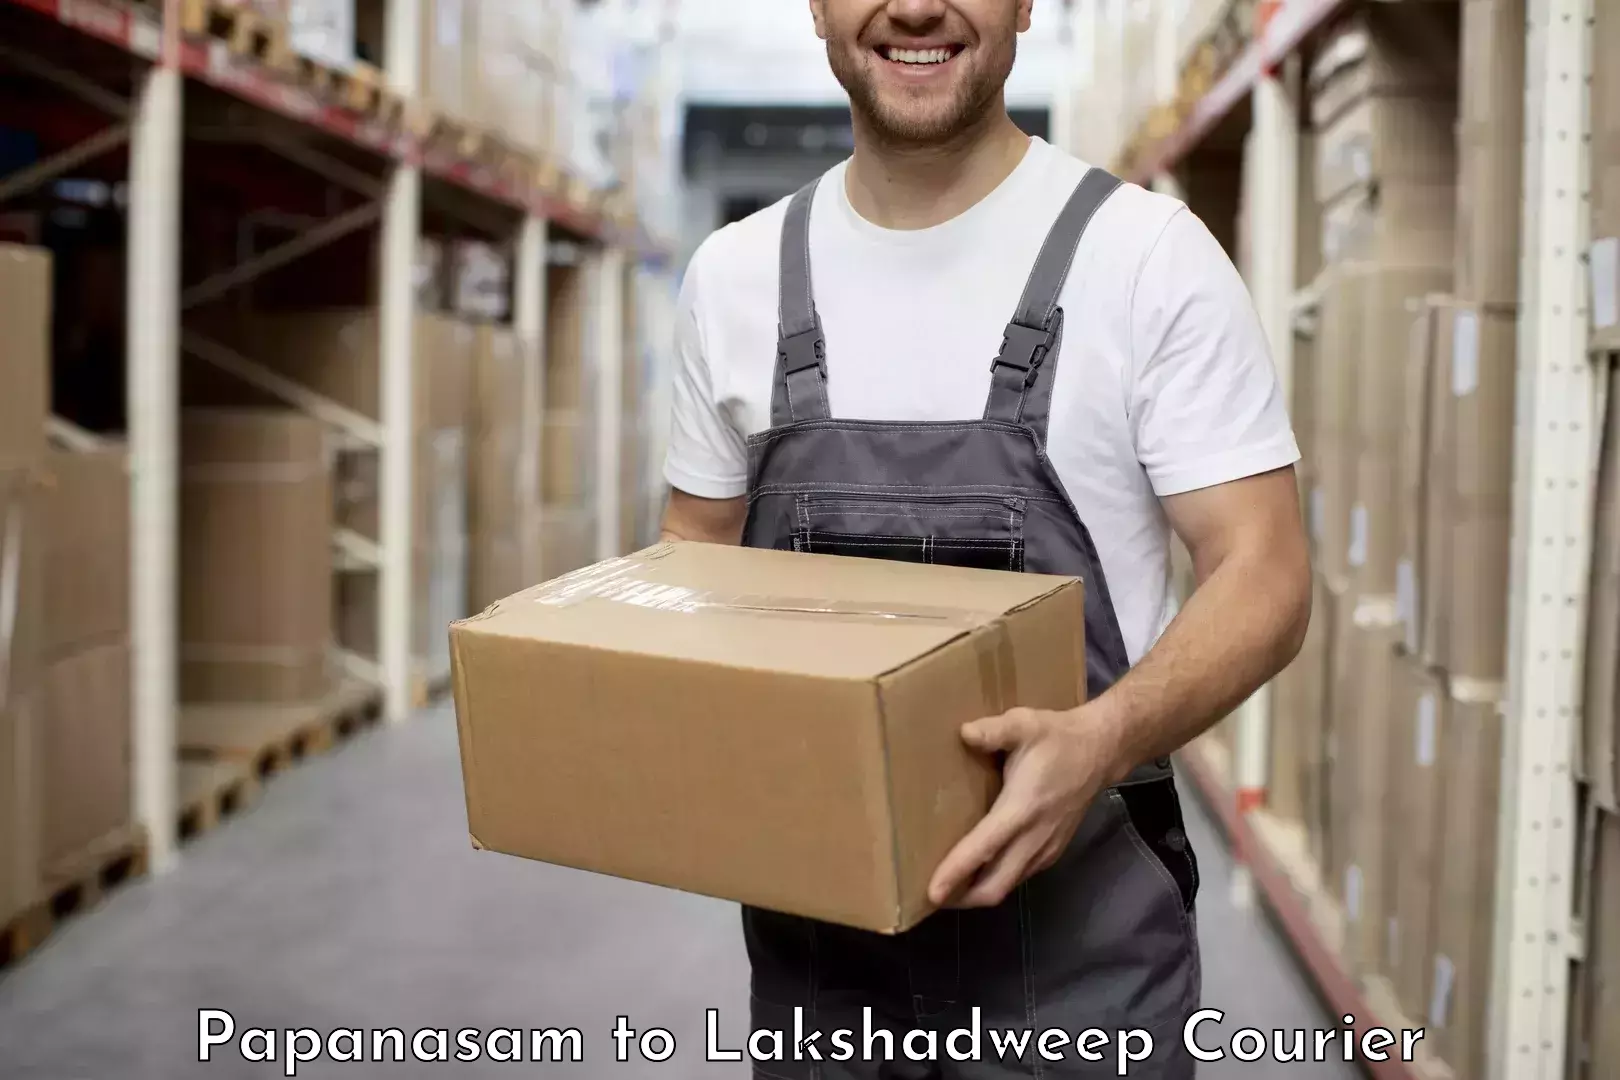 Multi-national courier services Papanasam to Lakshadweep